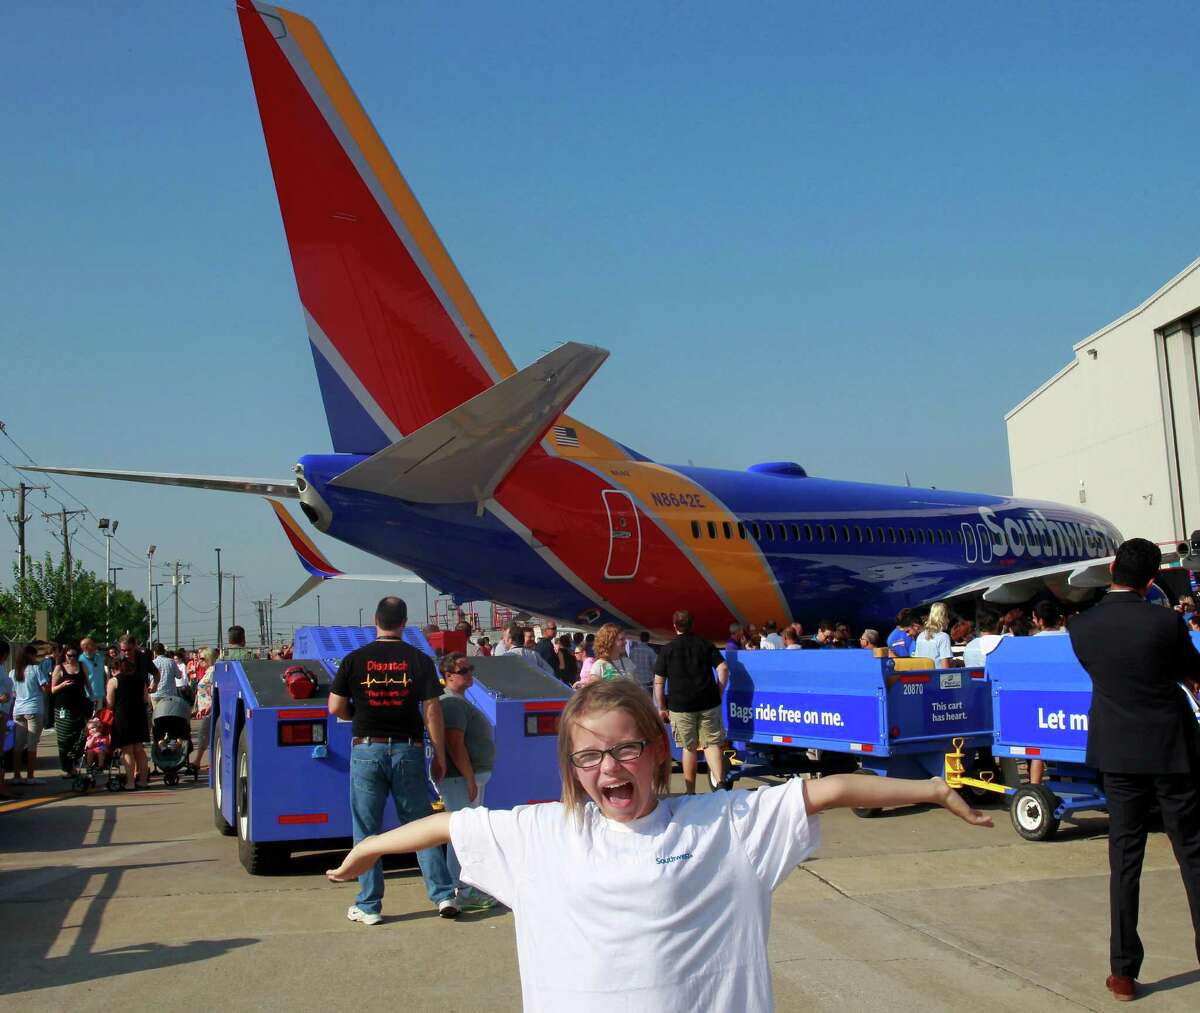 Indigo Pyles, 10, strikes a pose﻿ during an event Monday in Dallas unveiling a new color scheme for Southwest Airlines jets. The airline has a major presence at Houston's Hobby Airport.﻿